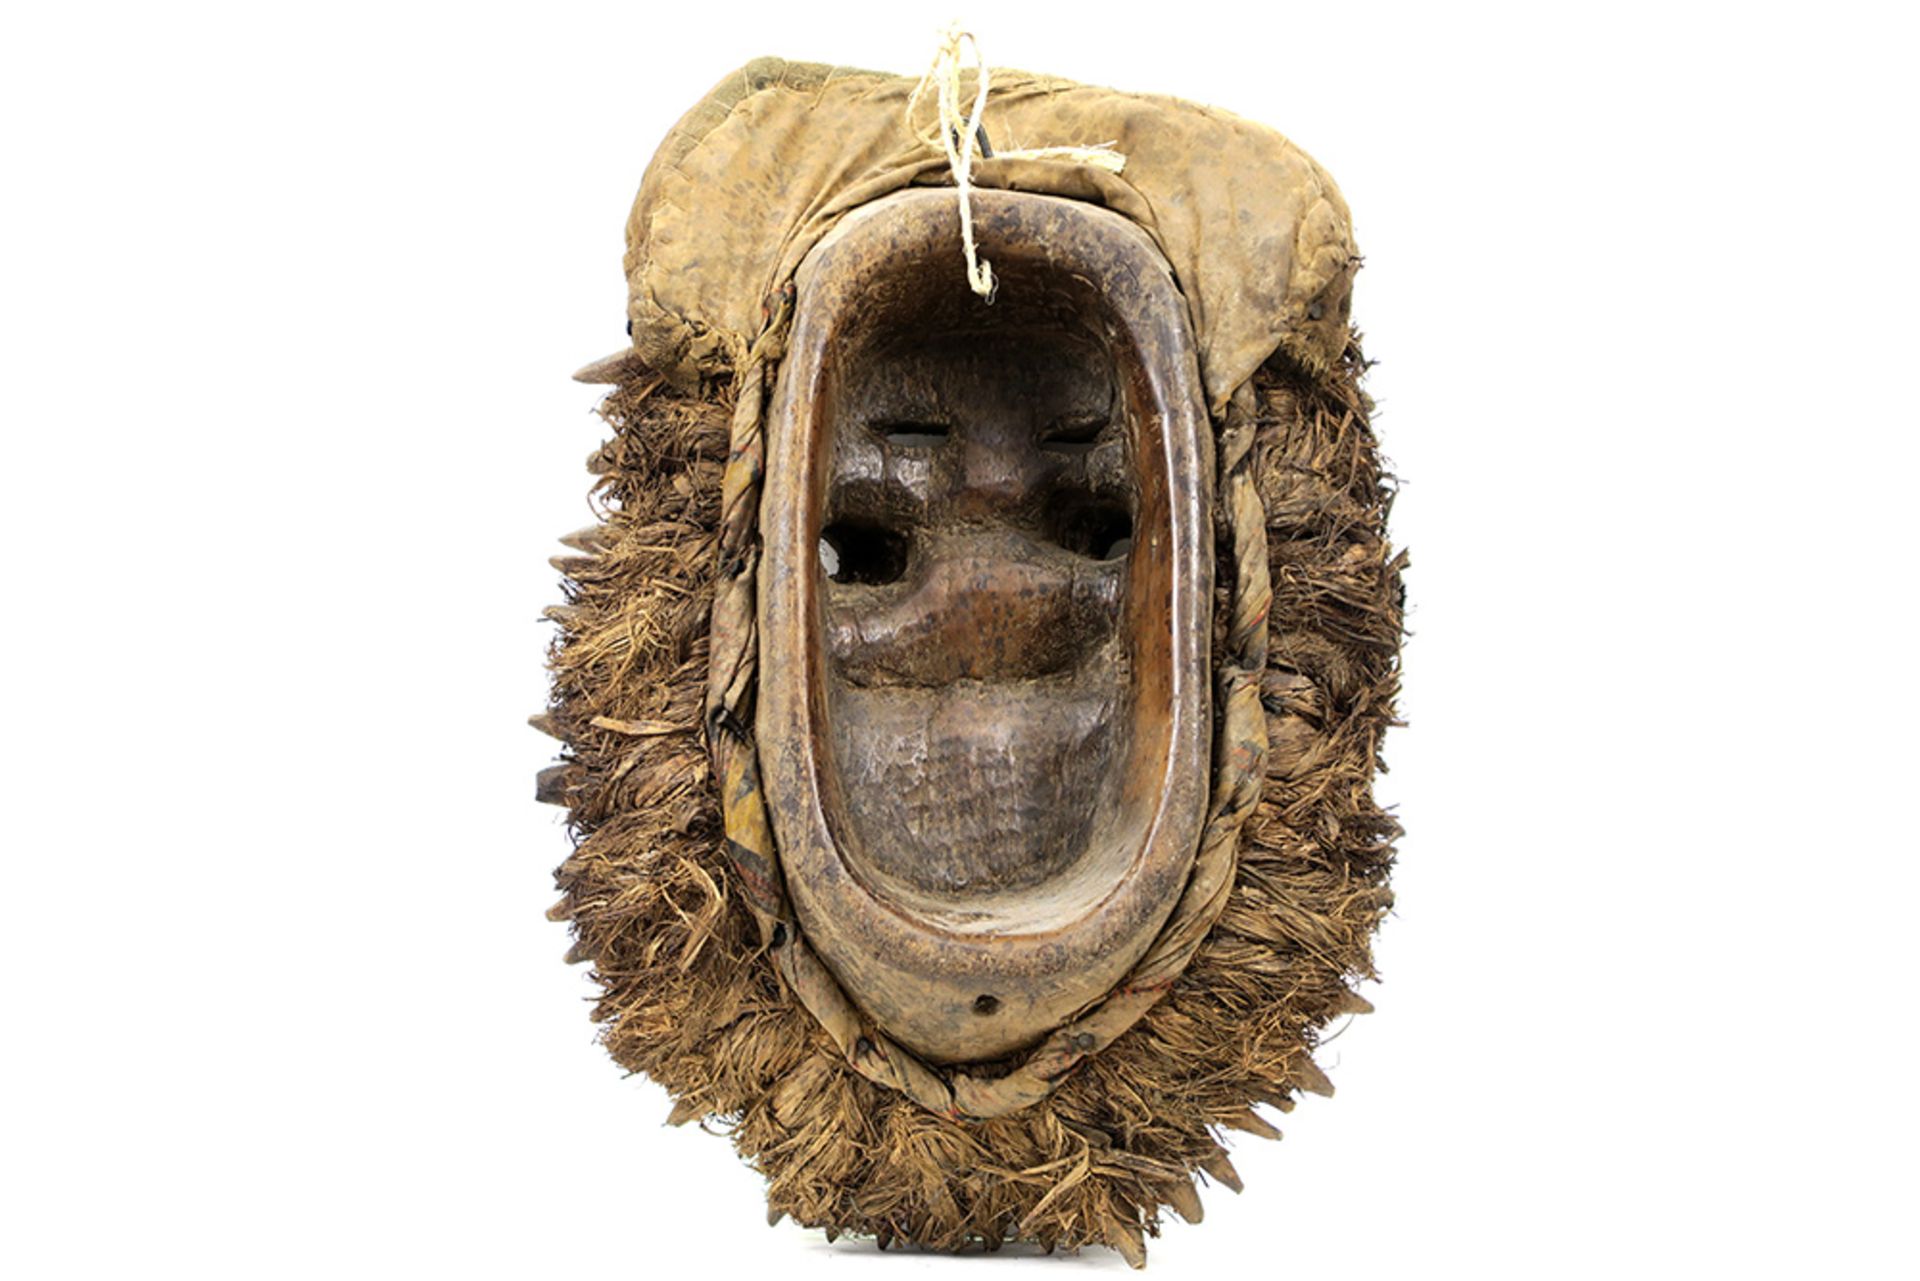 mid 20th Cent. Ivory Coast Guere mask in wood with shells, feathers, cotton, etc || AFRIKA / - Image 2 of 2